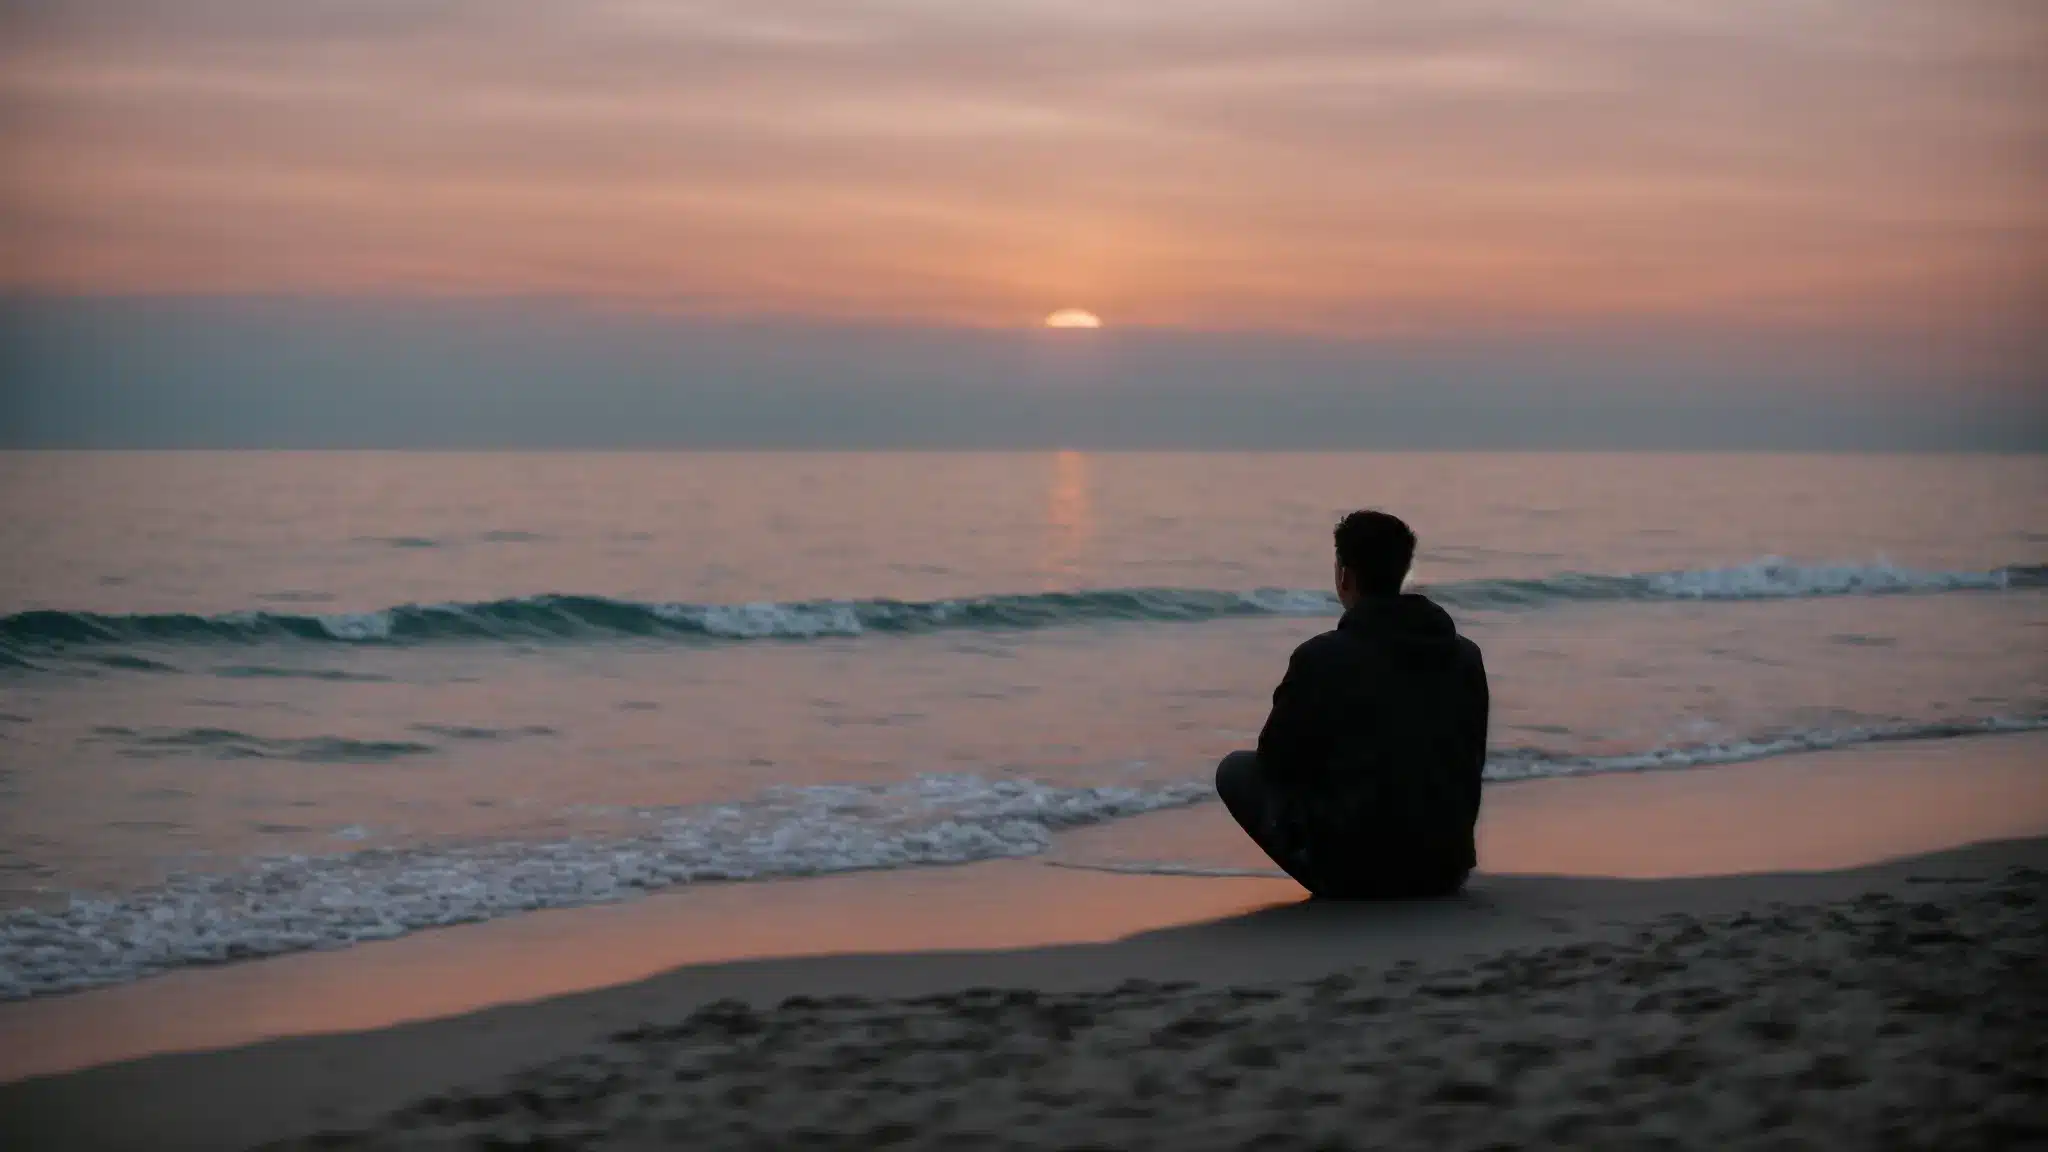 a person sitting alone on a beach at sunset, staring pensively at the sea.